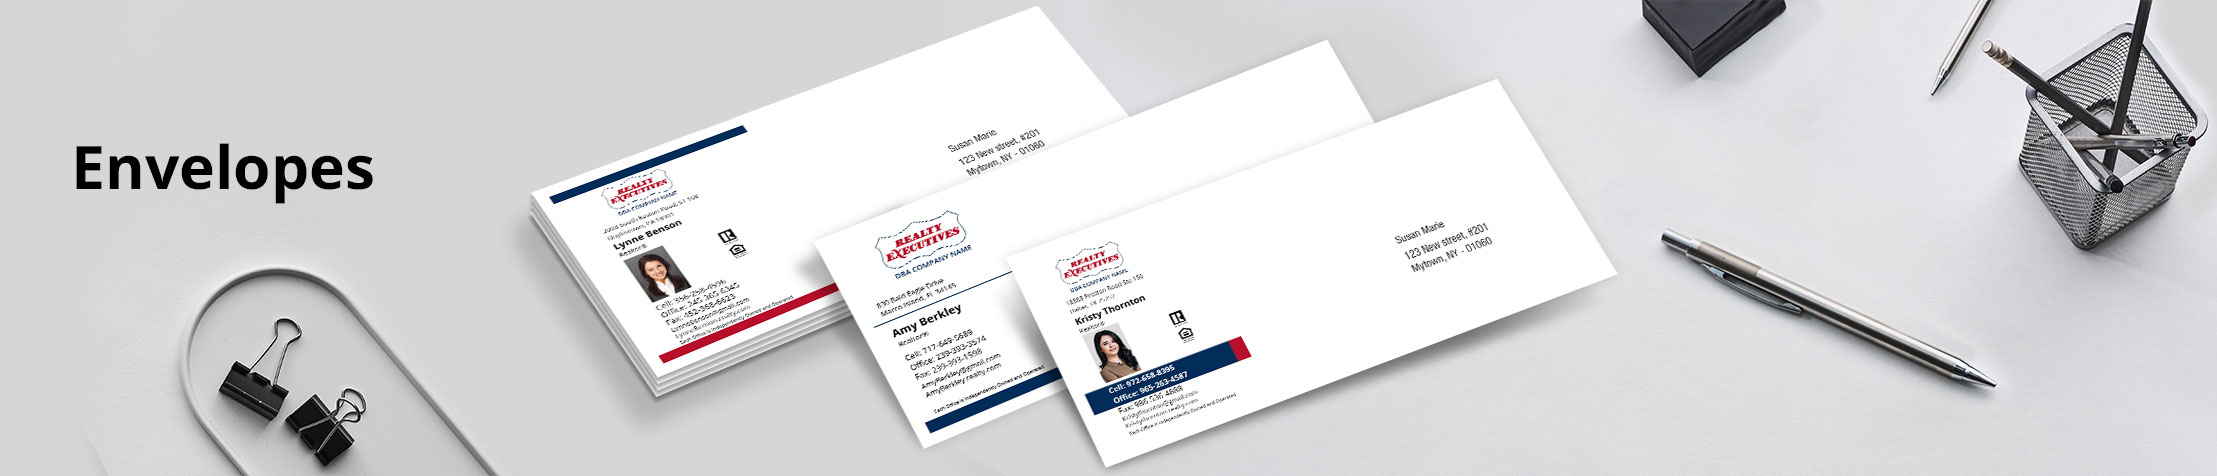 Realty Executives Real Estate #10 Envelopes - Realty Executives - Custom Stationery Templates for Realty Executives Offices and Real Estate Agents | BestPrintBuy.com